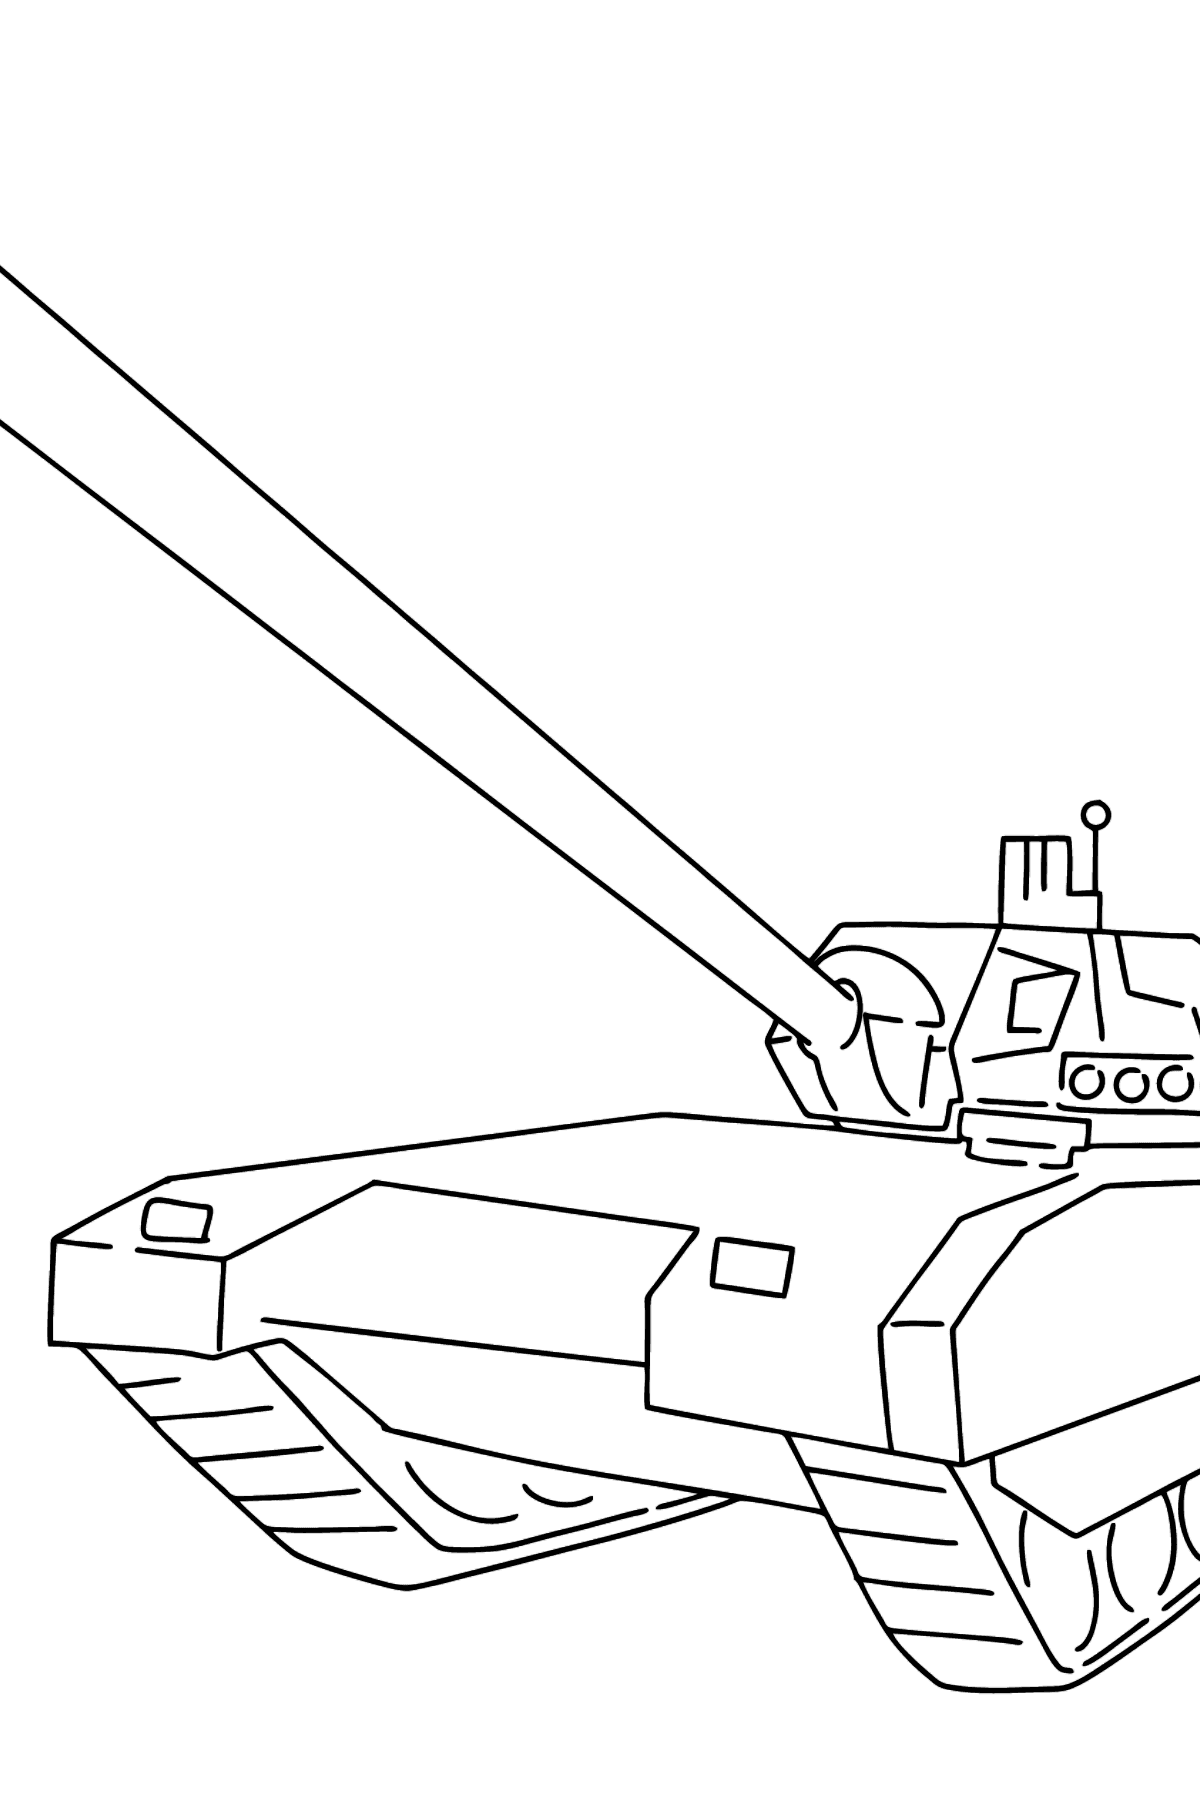 Armata Tank coloring page - Coloring Pages for Kids